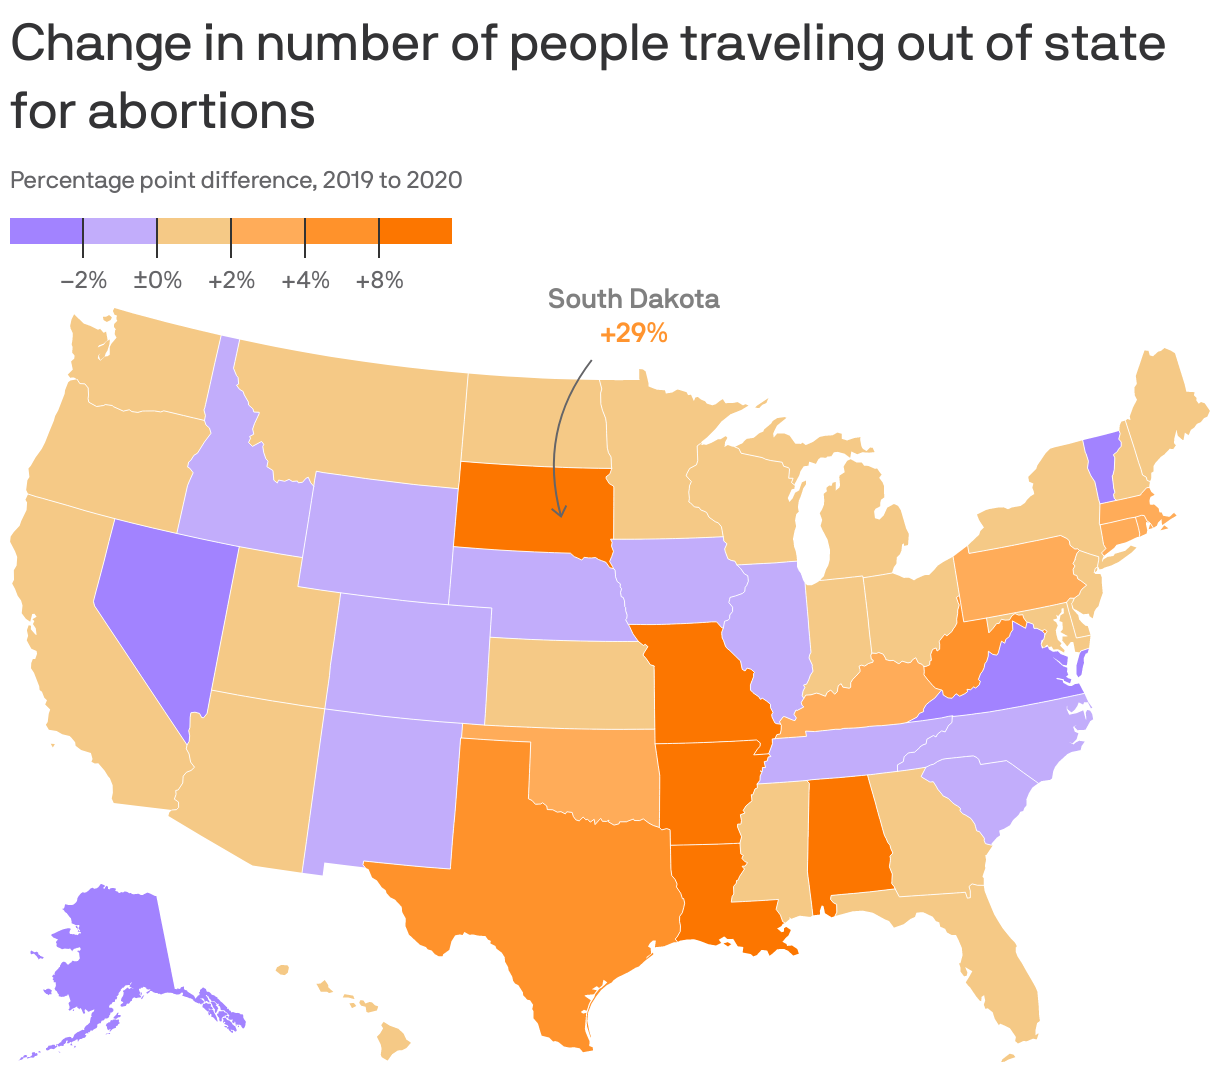 Change in number of people traveling out of state for abortions